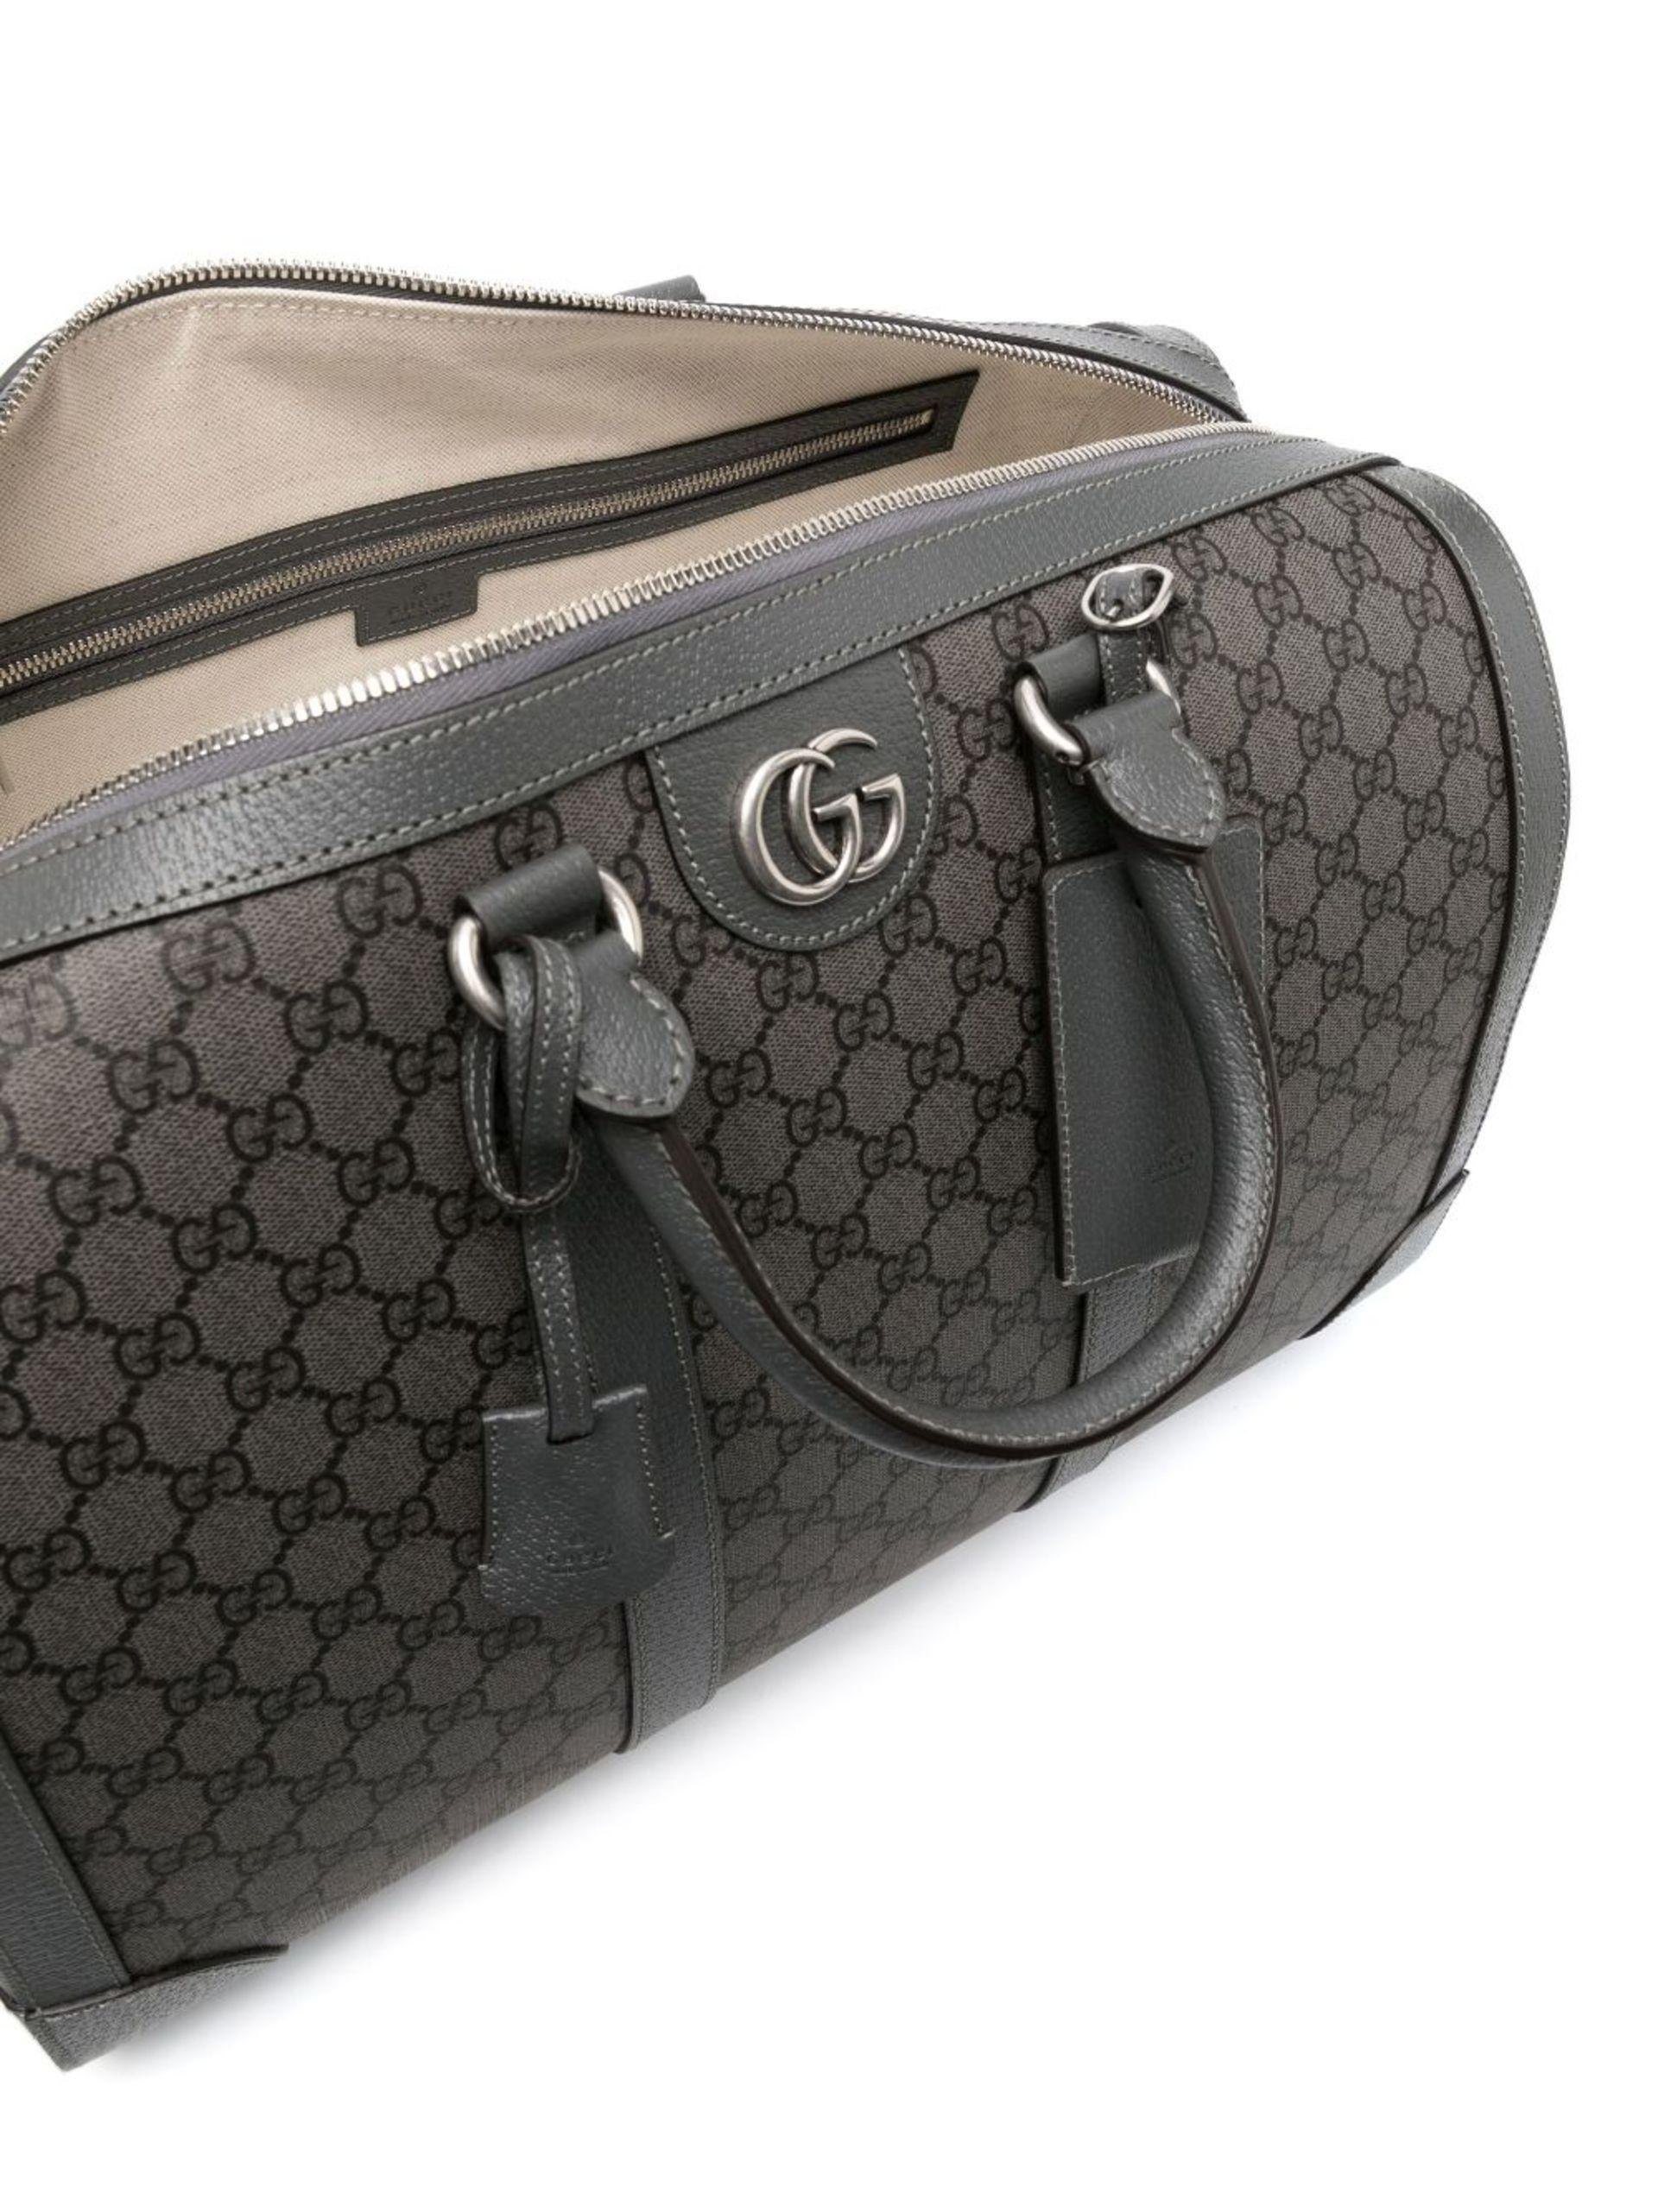 Gucci Ophidia small duffle bag, Grey